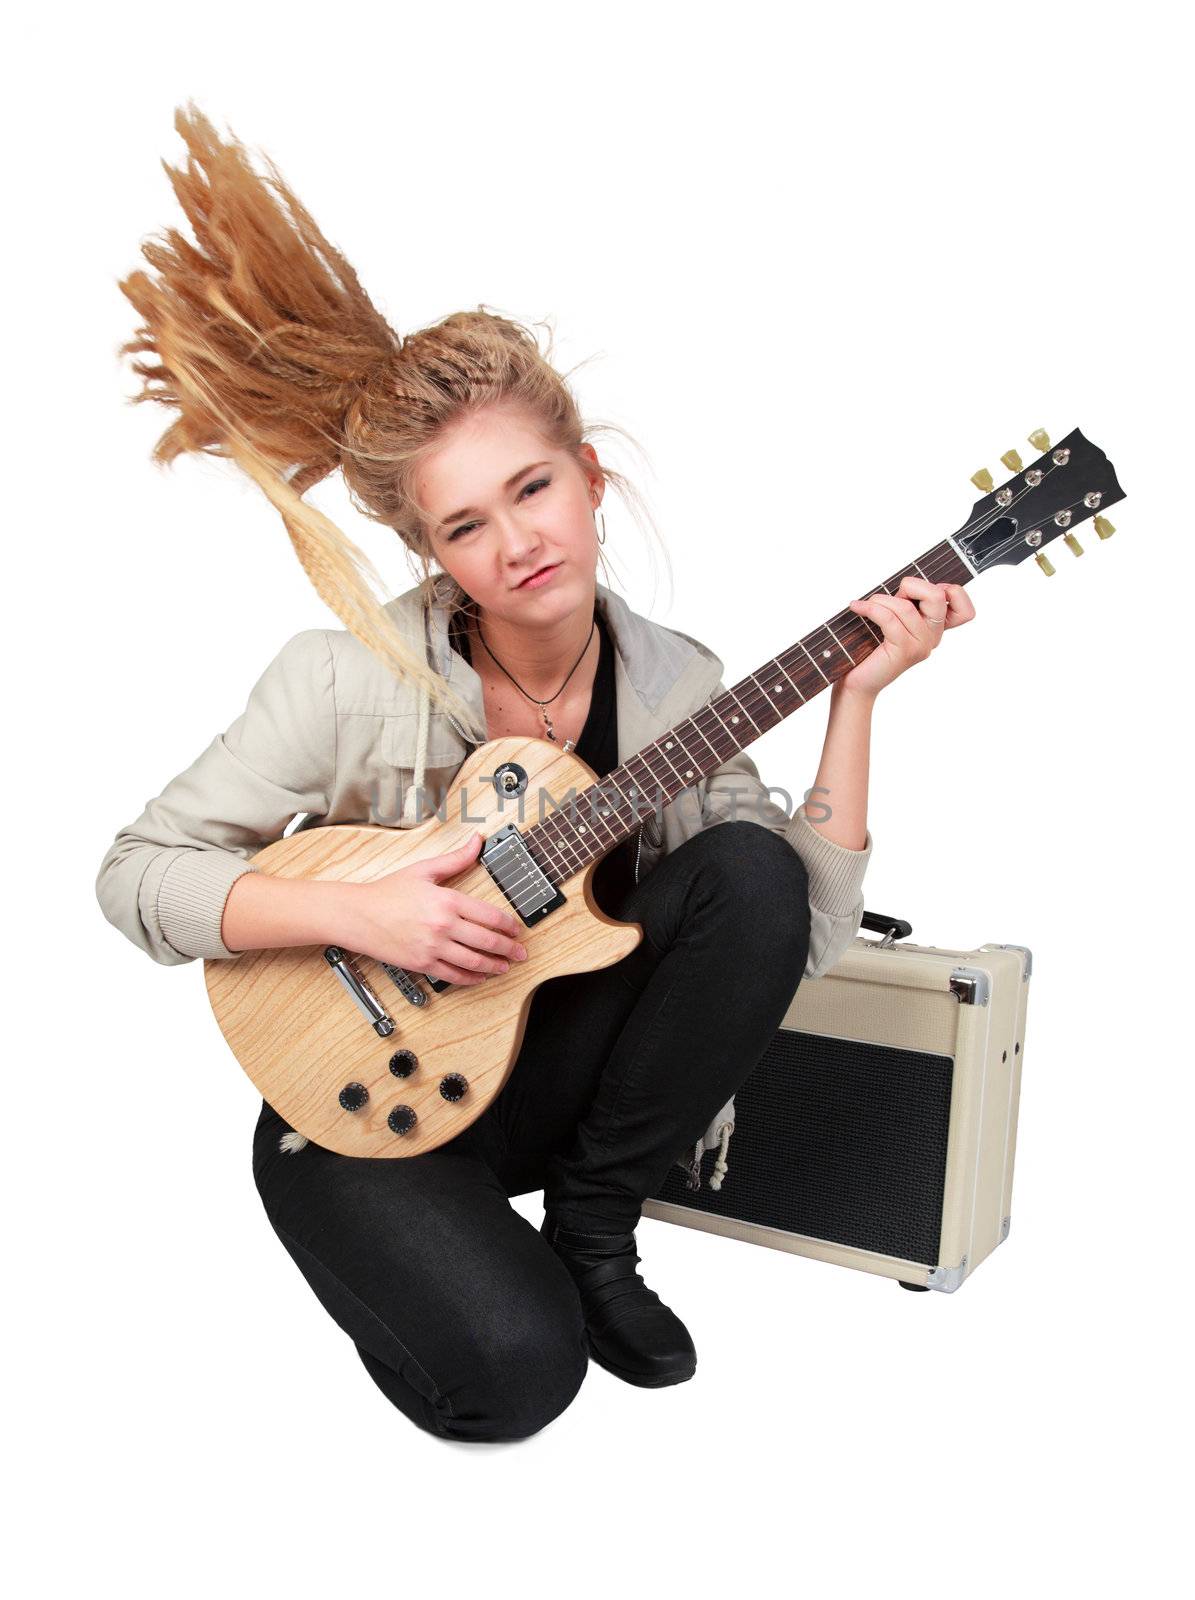 Blond rock teenage girl playing an electric guitar on her knees. Studio shot, isolated on white background.